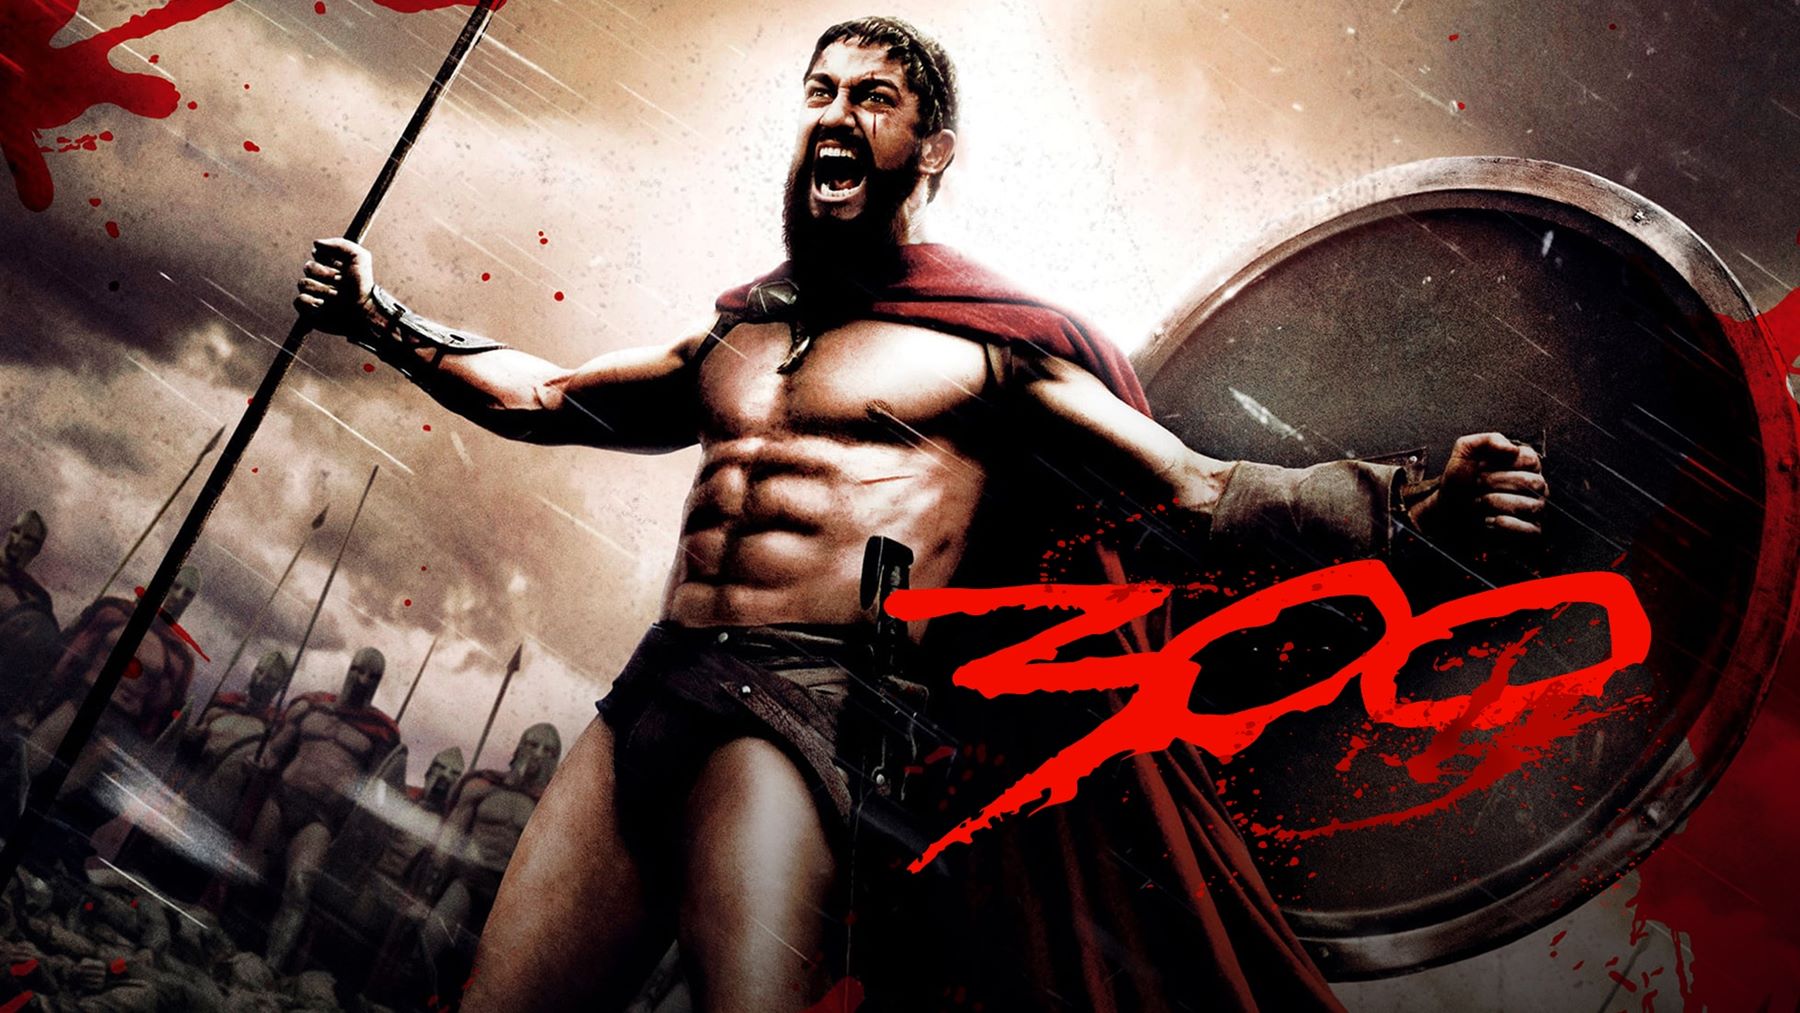 How To Watch 300